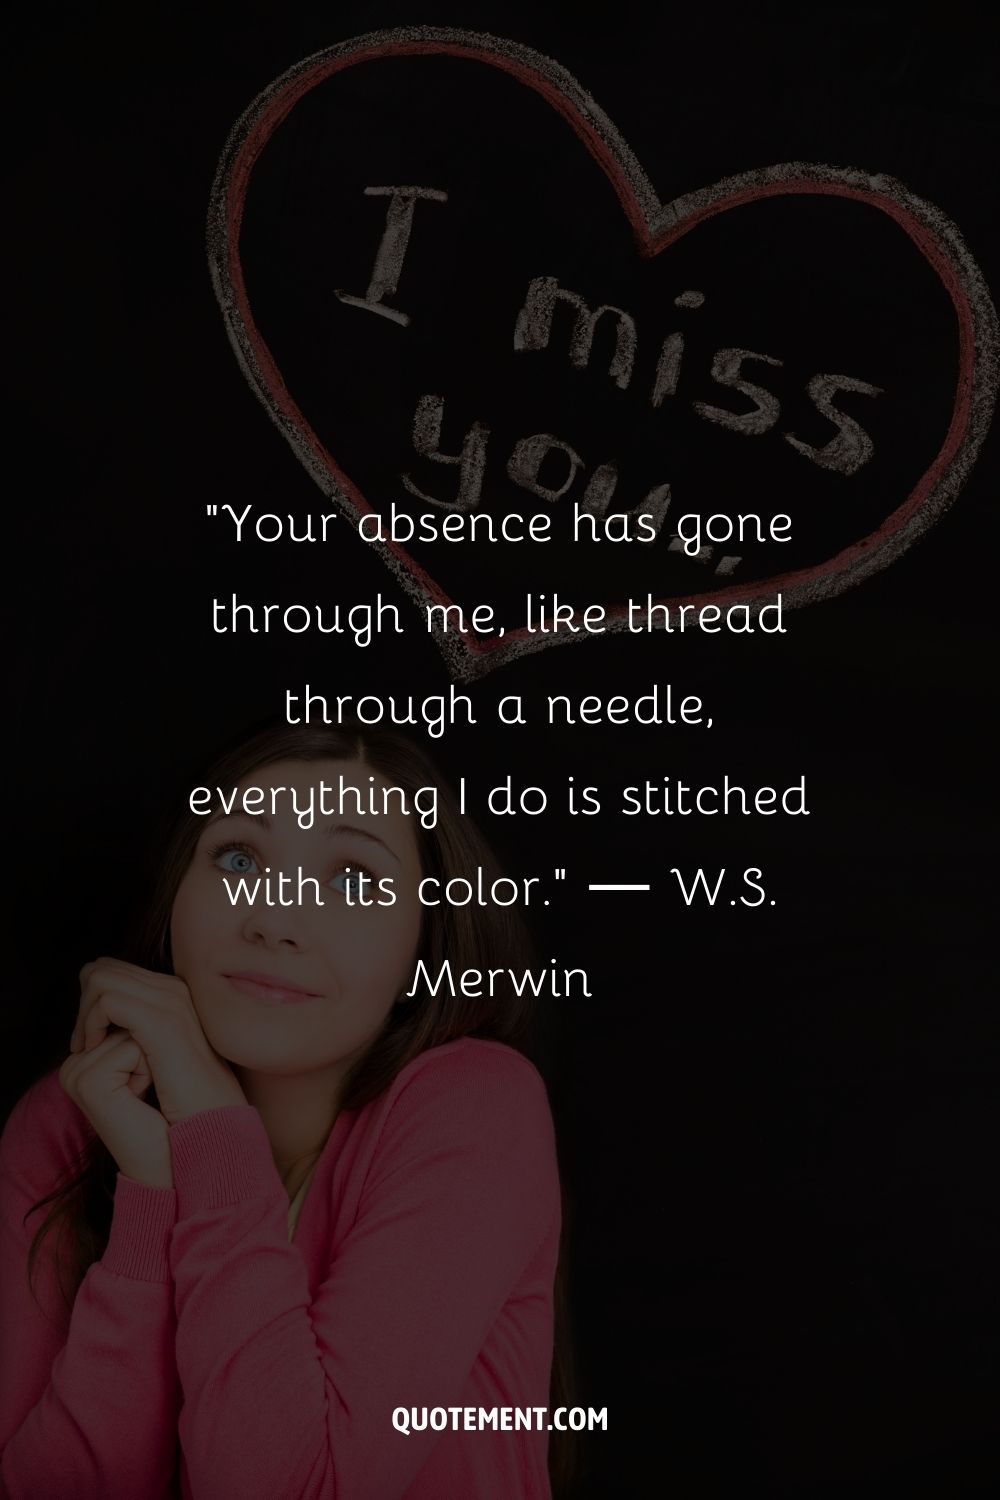 Your absence has gone through me, like thread through a needle, everything I do is stitched with its color.